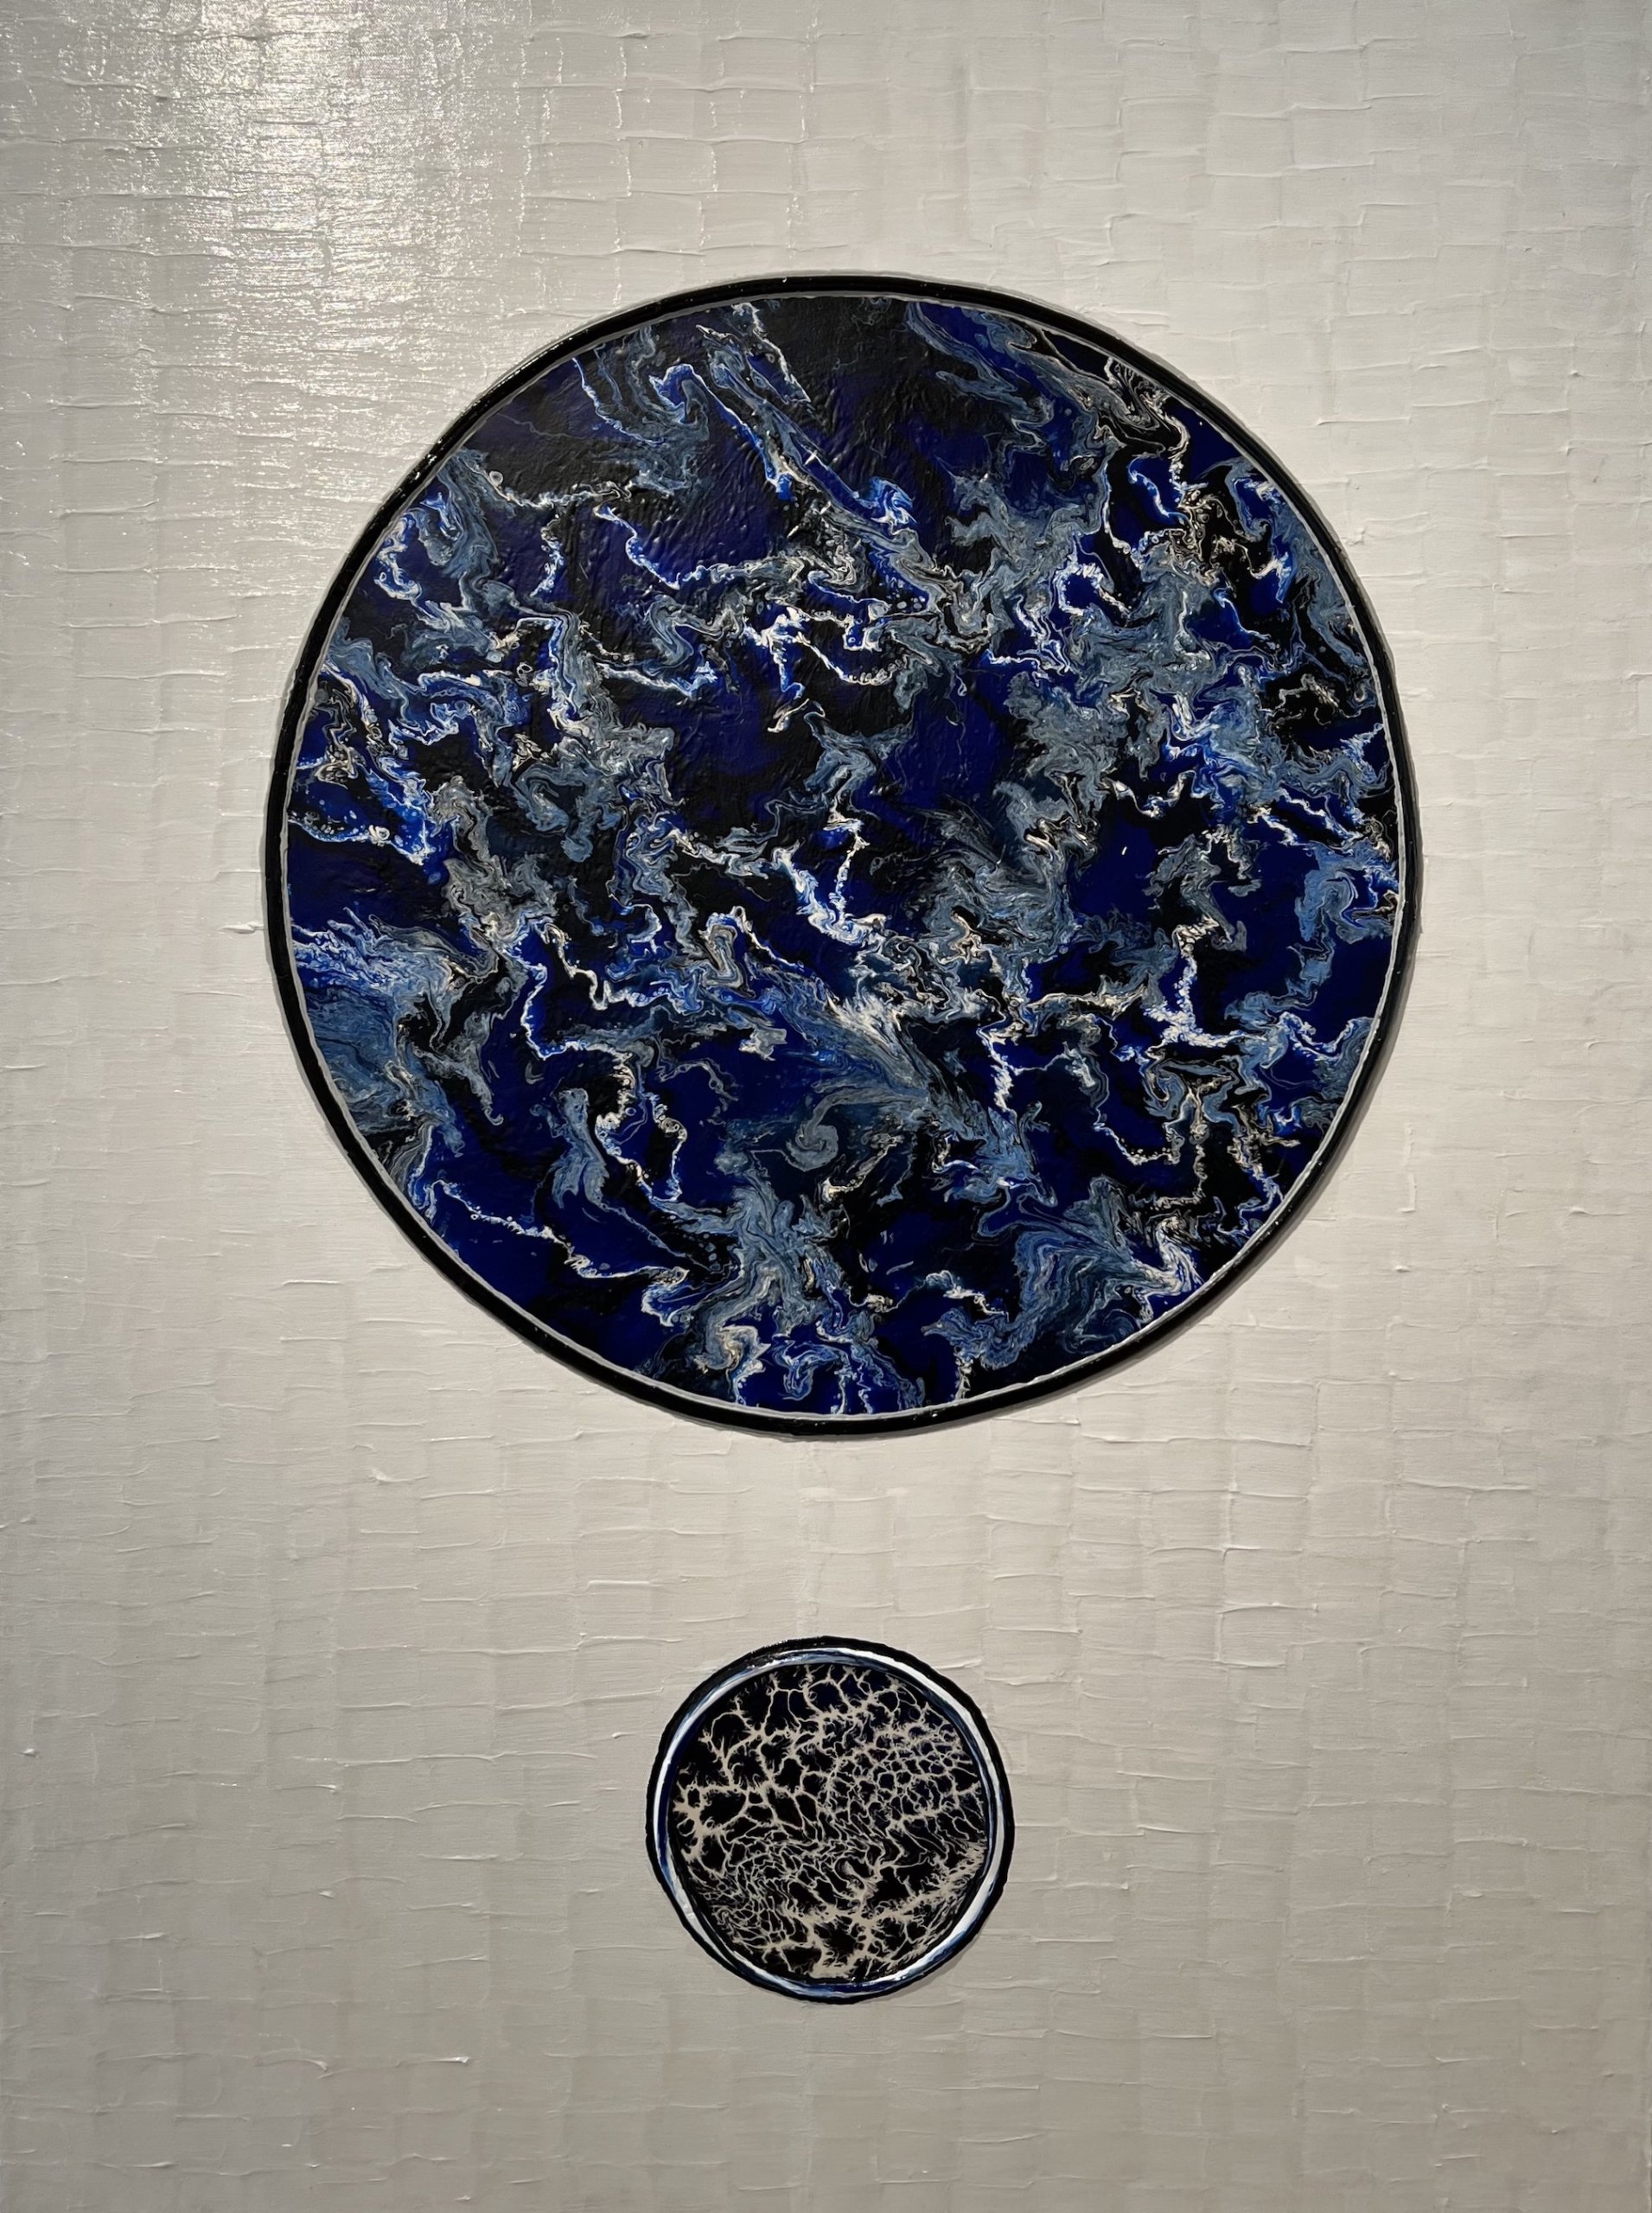 by Chris Lucore "The blue planet" (2022, 48" x 36") on display at Lucore 